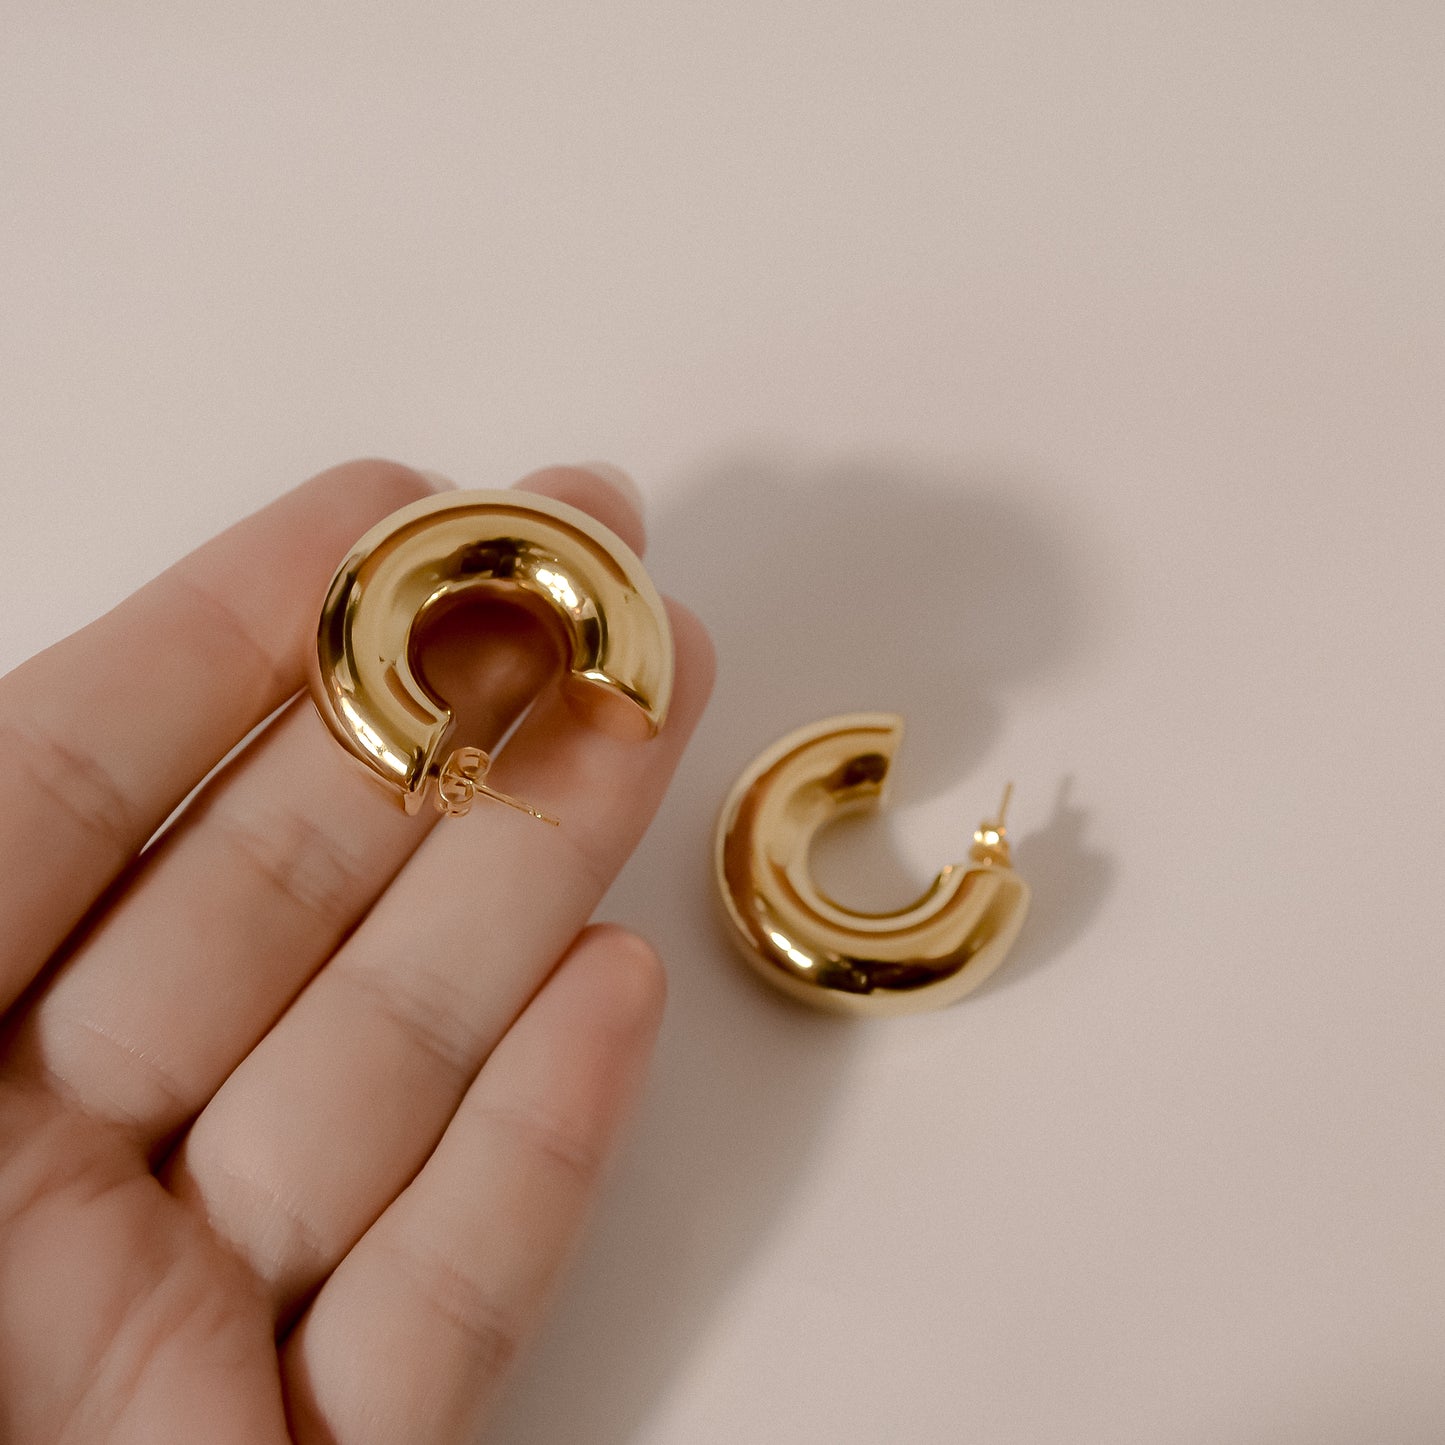 Sade collection, chunky gold statement piece earrings